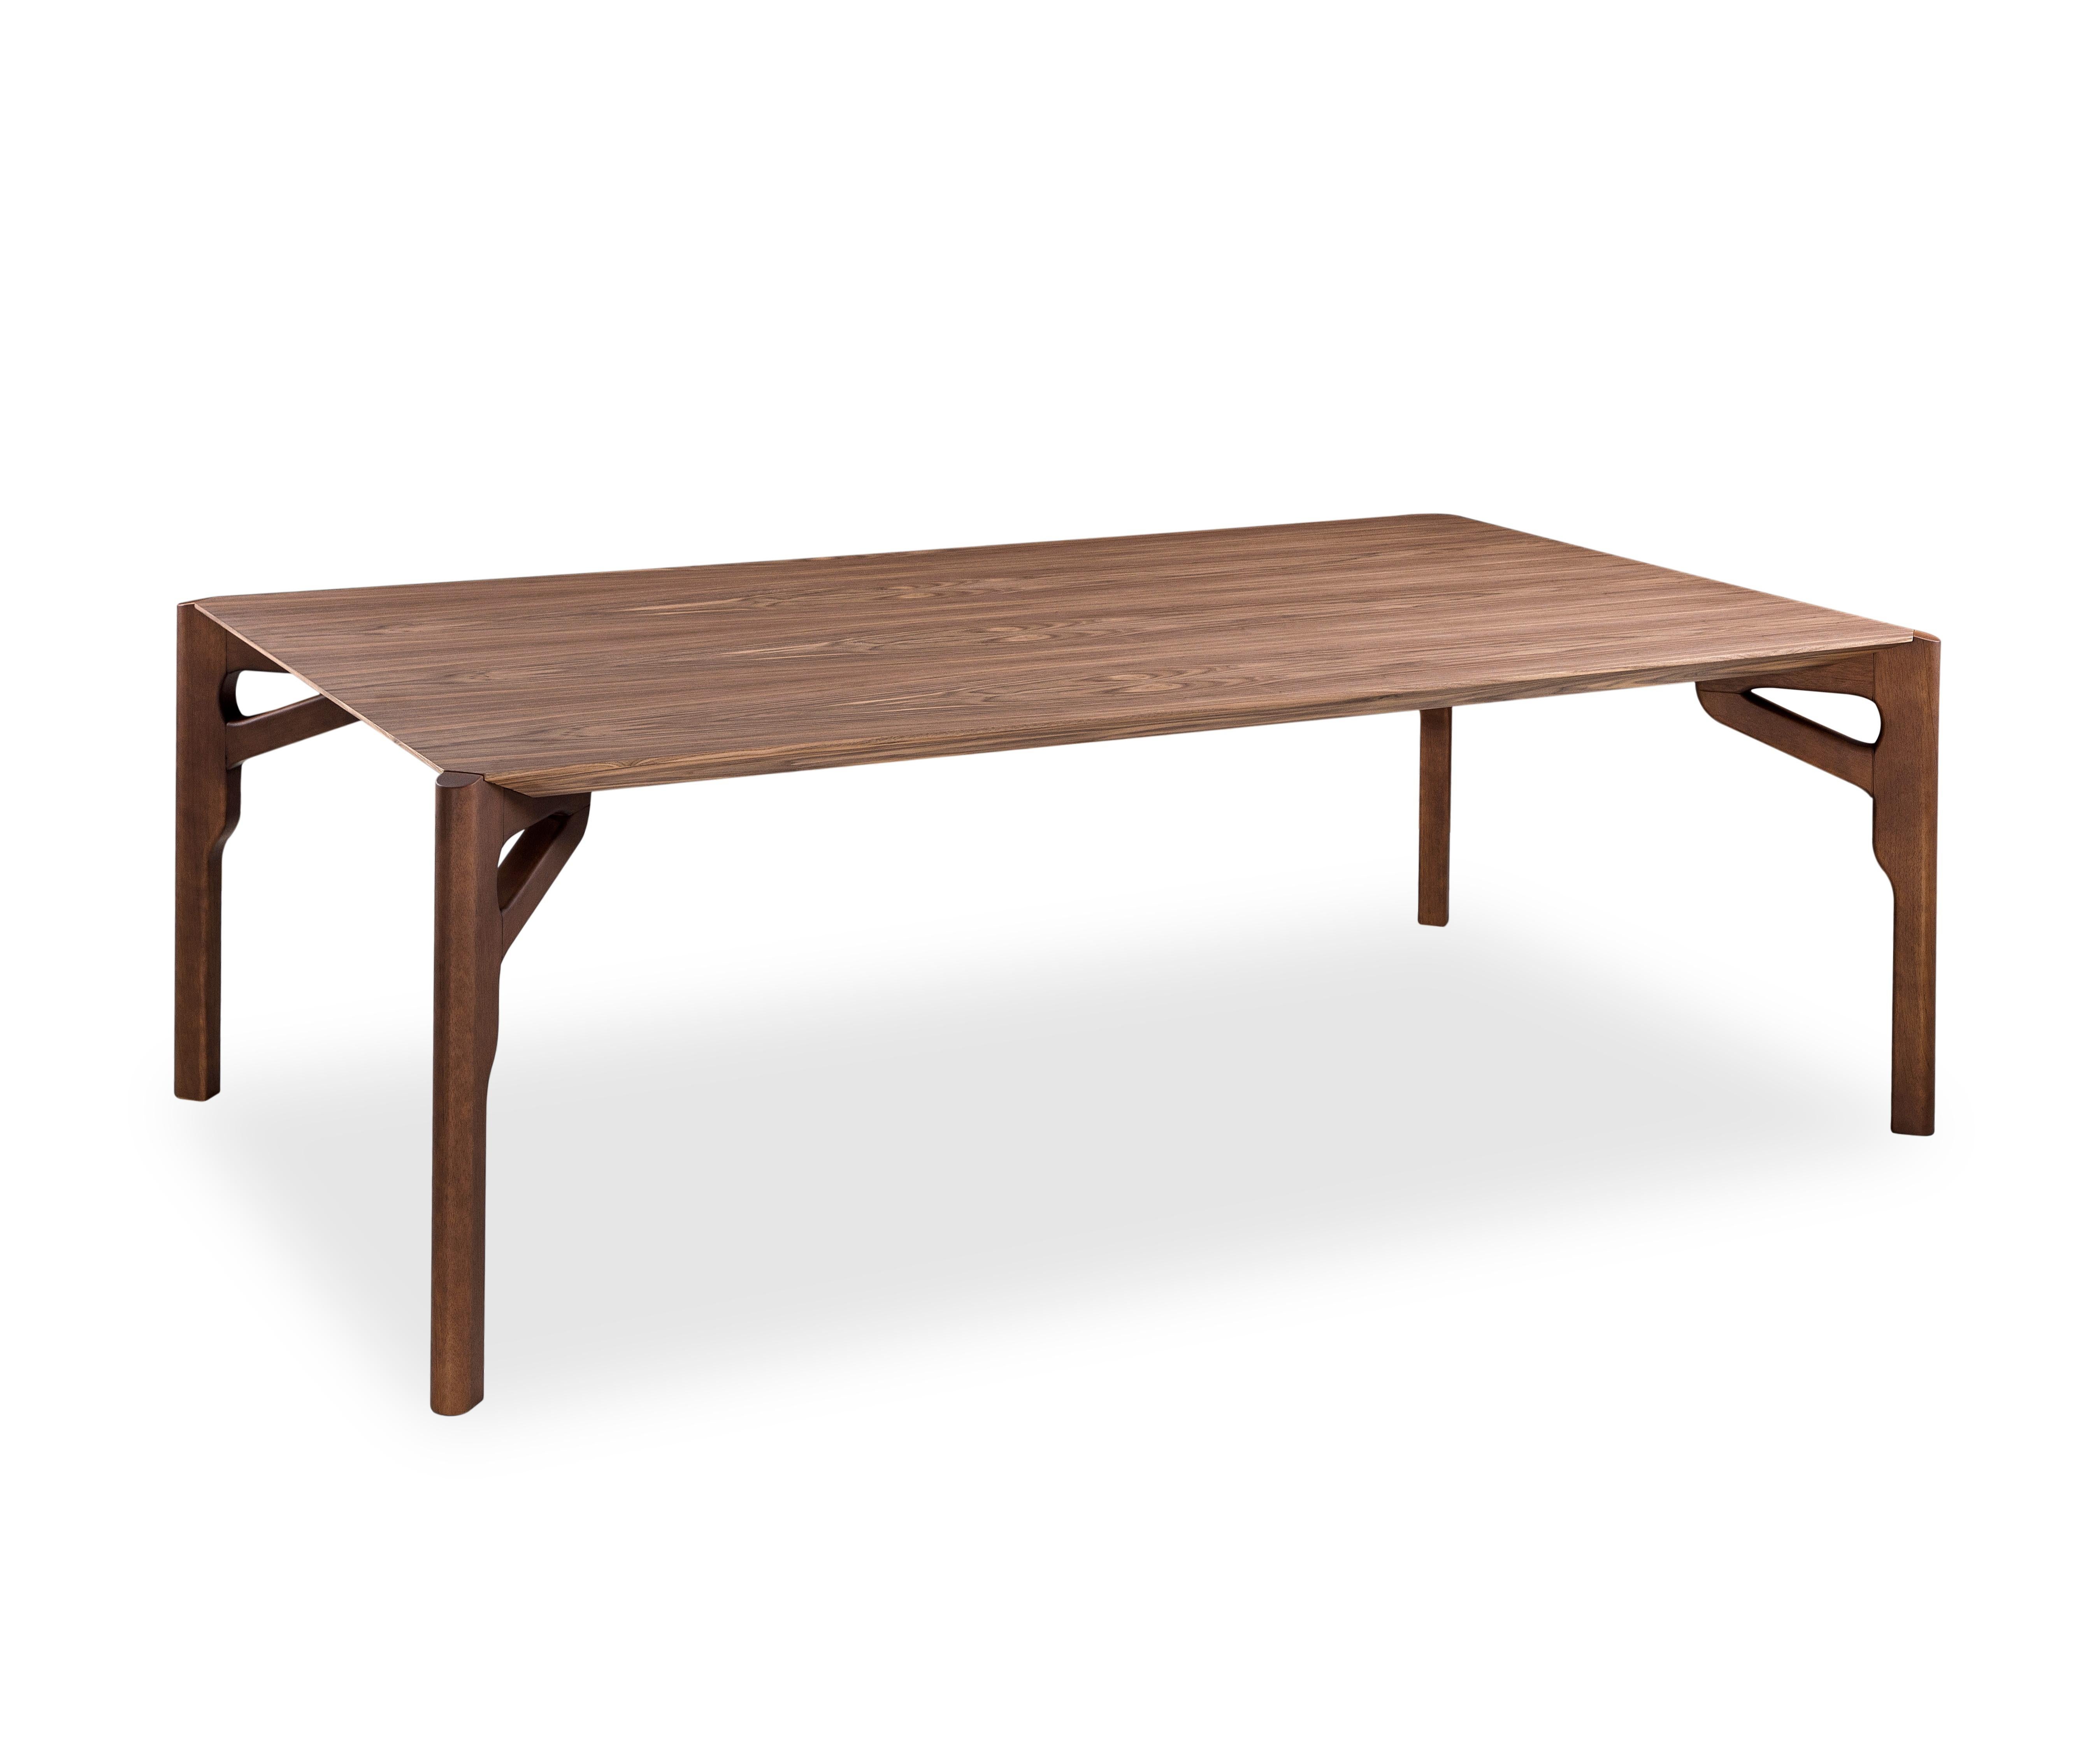 The Hawk dining table has been designed by our Uultis Design team with a walnut finish veneered table, the perfect addition to any dining room. It is a sophisticated table for modern contemporary decor, inspired by Brazilian culture. The large